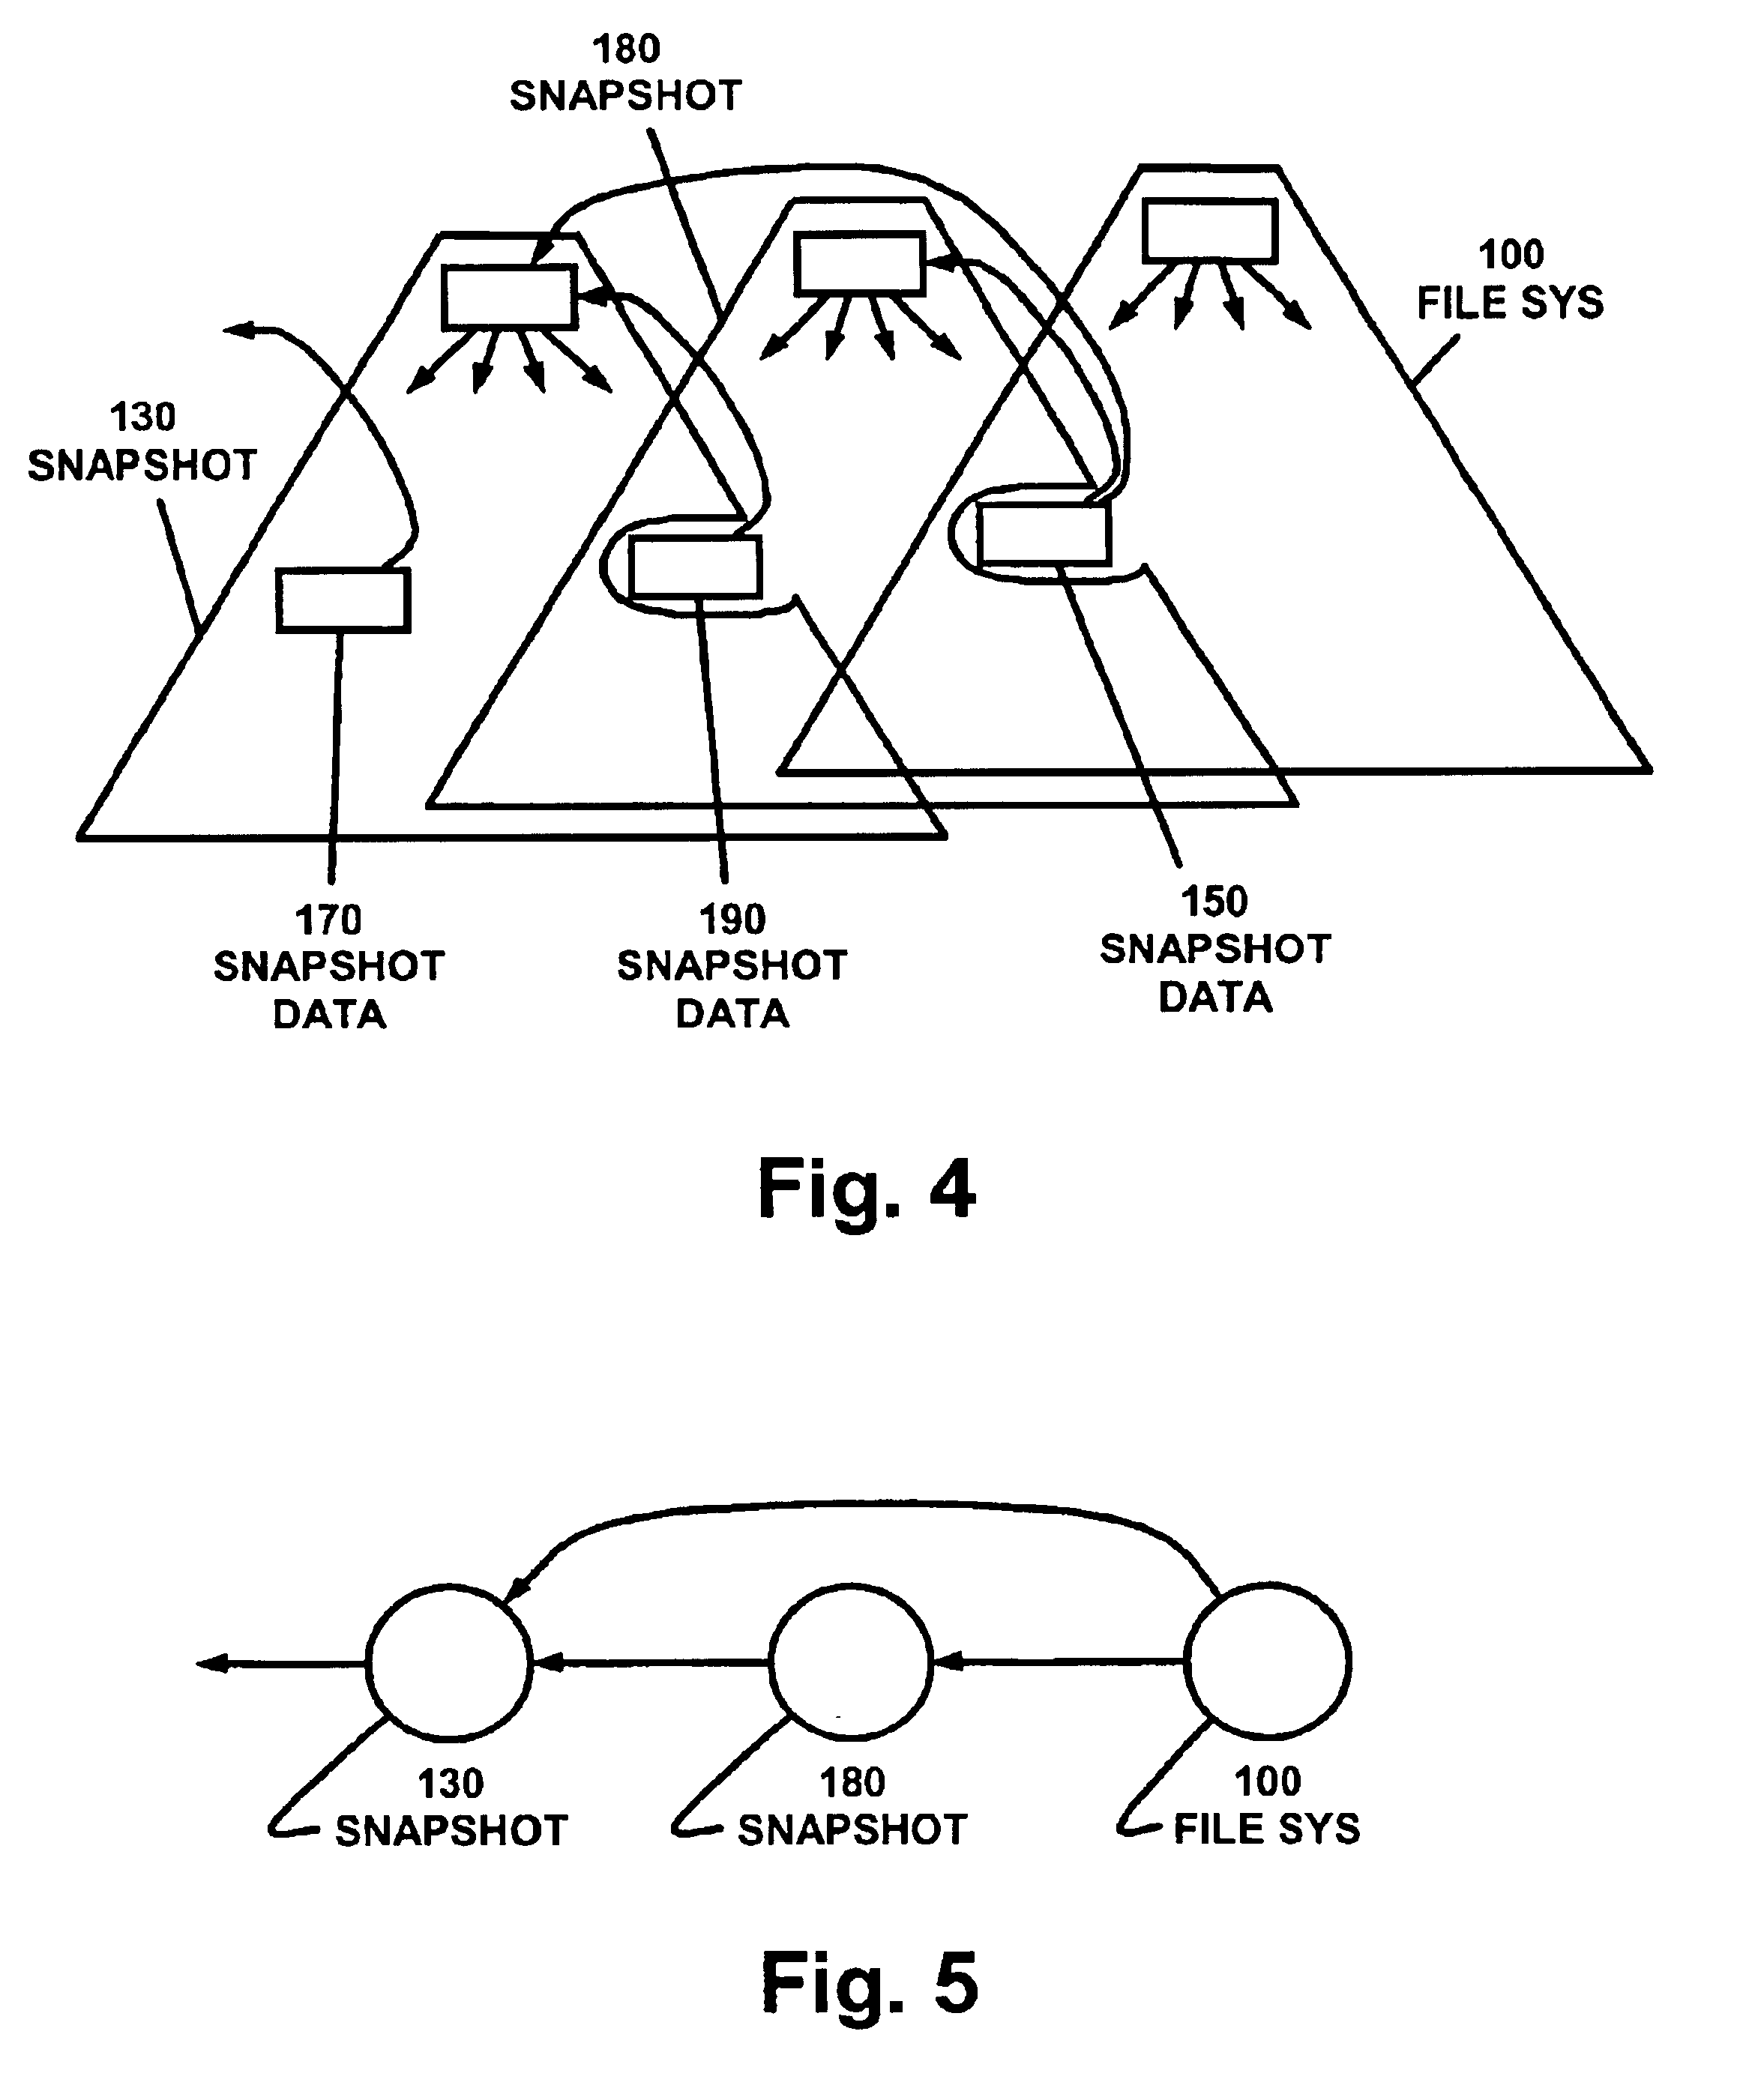 Multiple concurrent active file systems